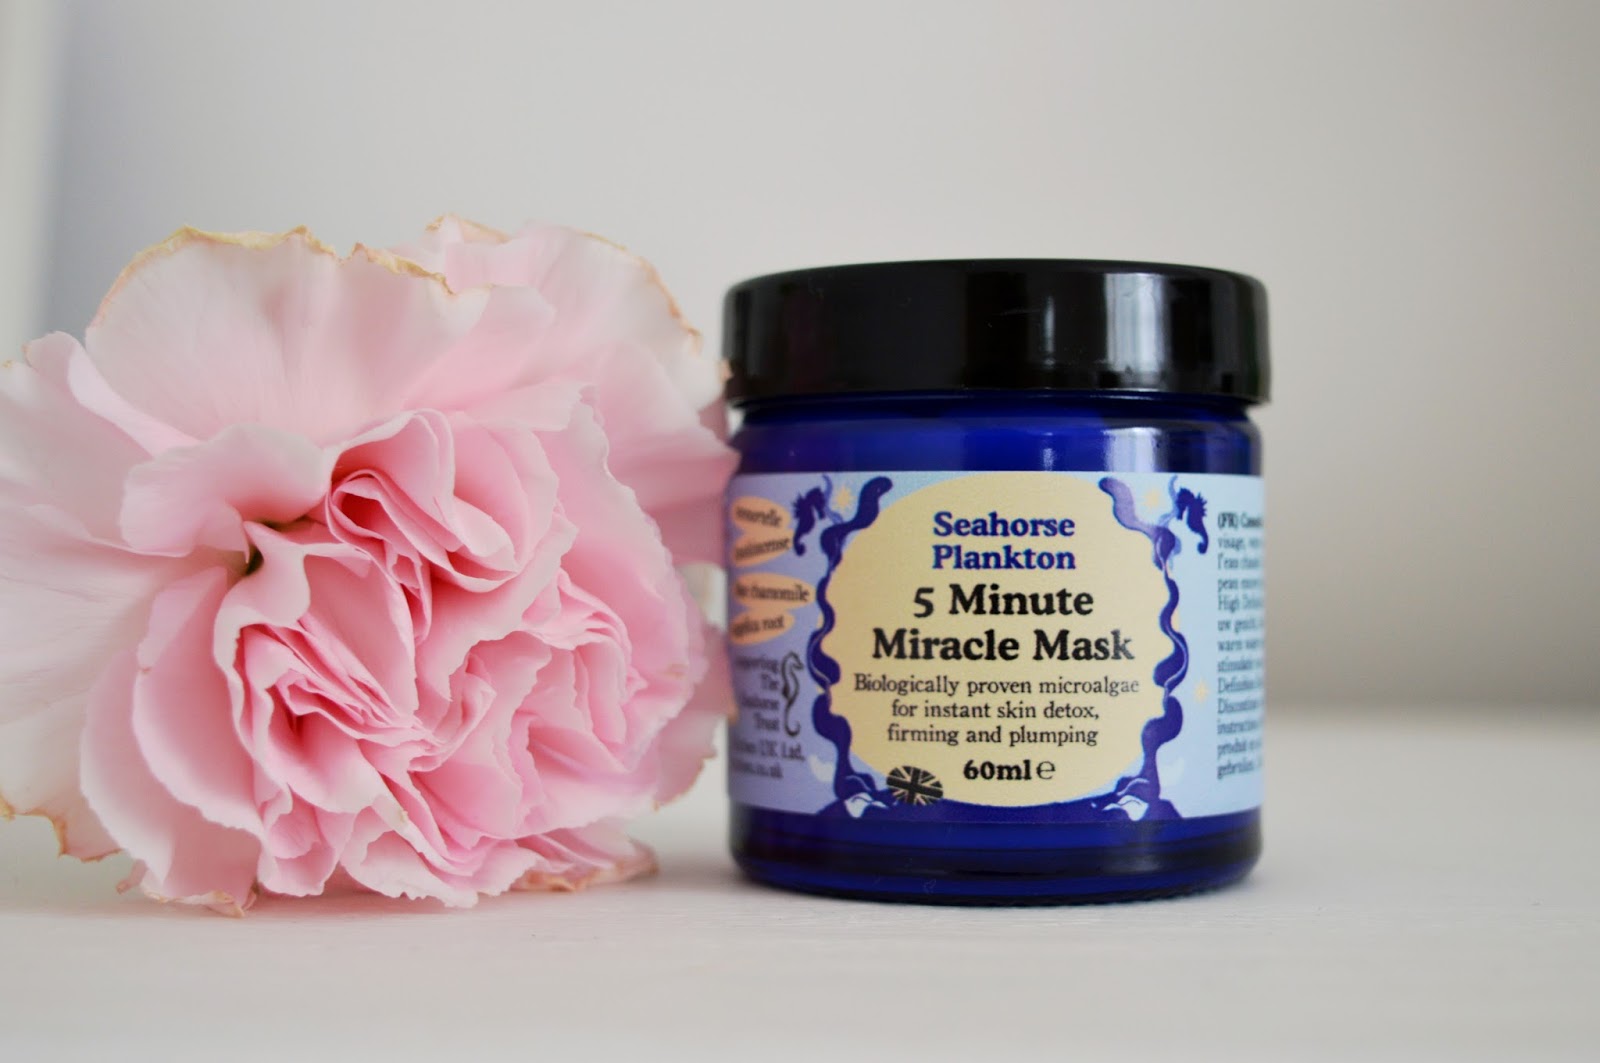 Beauty Kitchen Seahorse Plankton 5 Minute Miracle Mask review, UK beauty blog